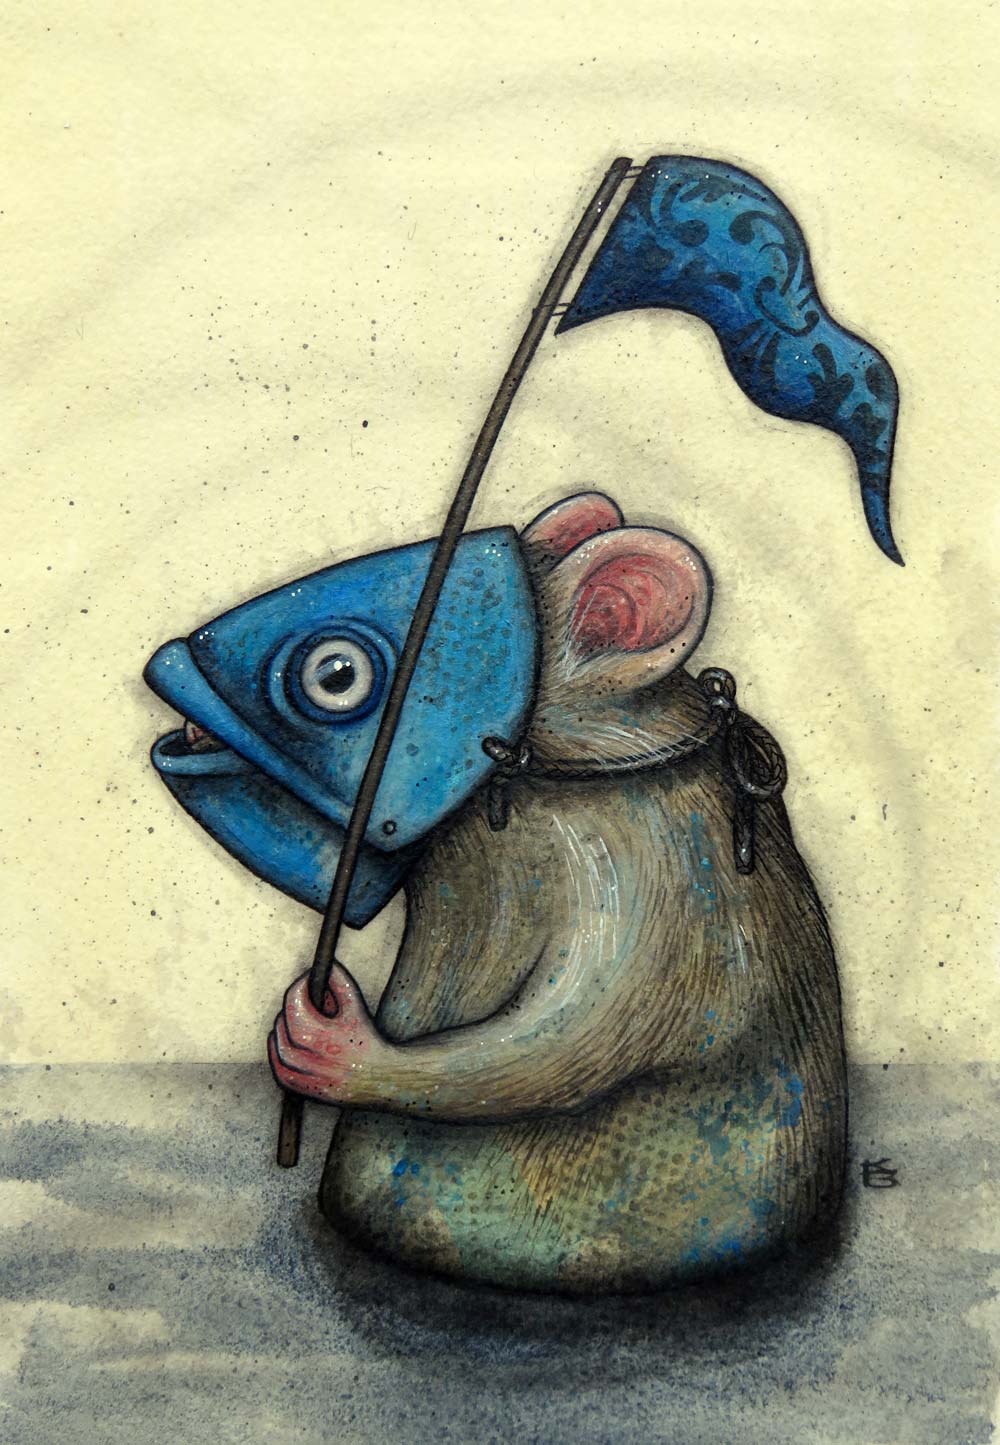 A rat wearing a fish head costume wading with a flag